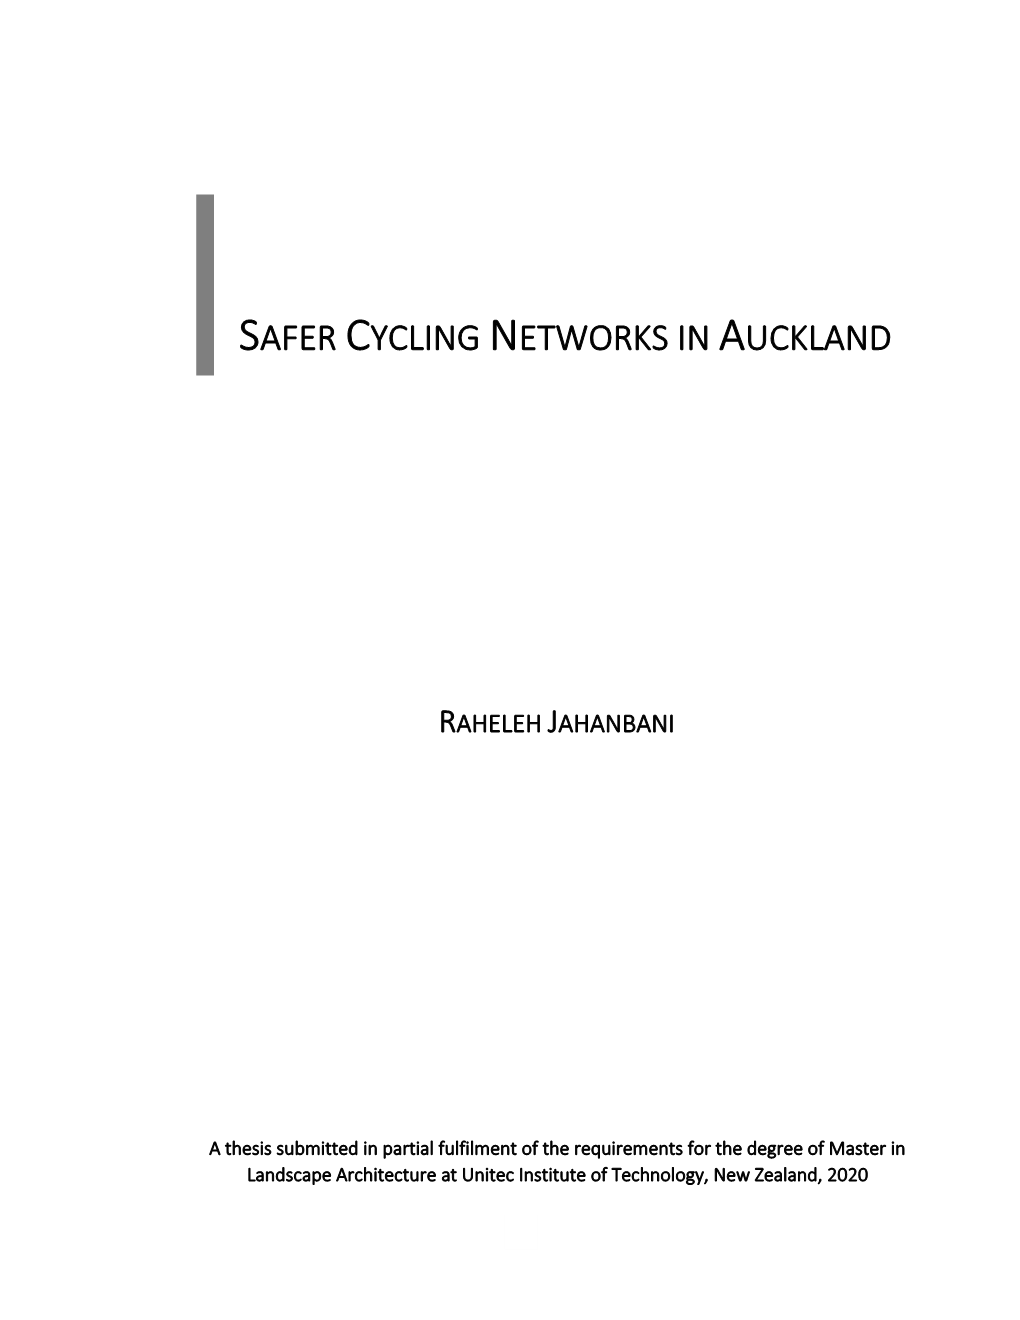 Safer Cycling Networks in Auckland